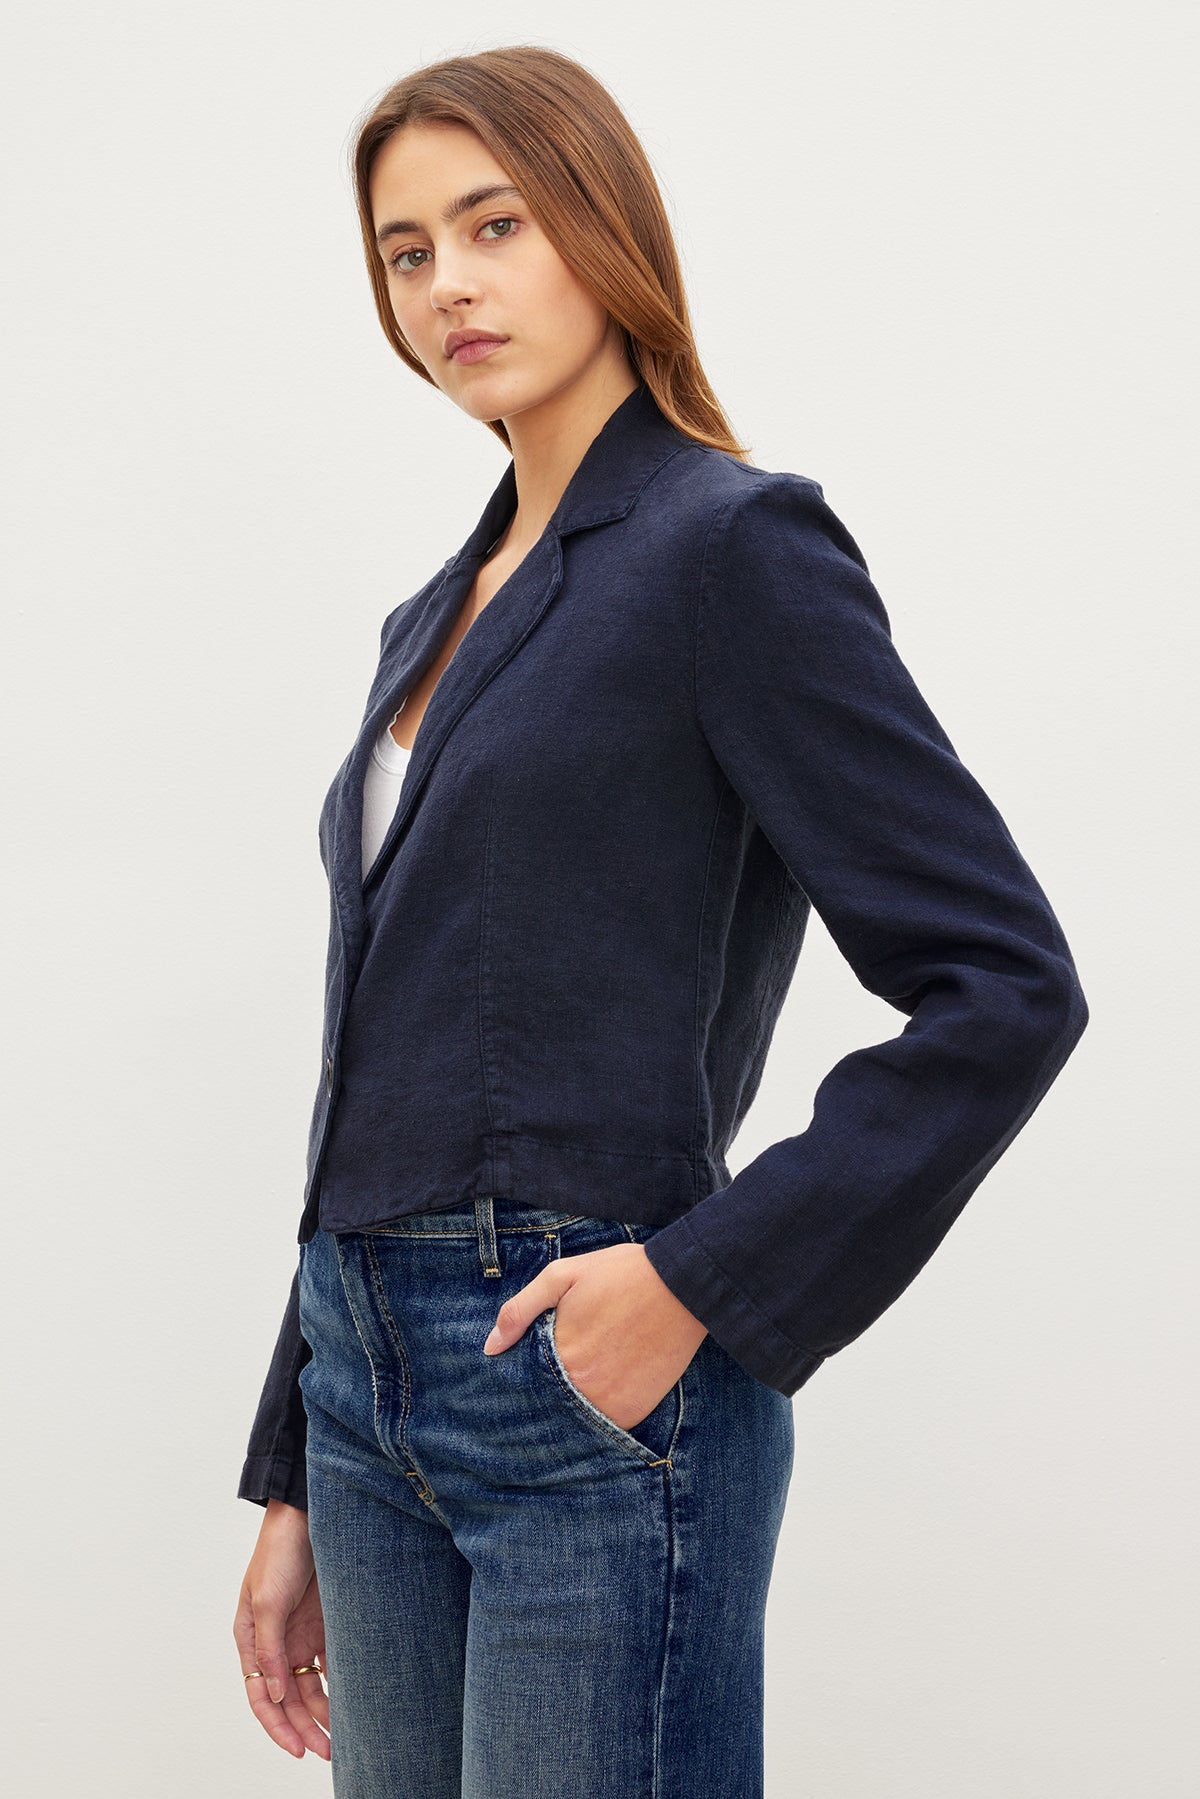   The model is wearing a Velvet by Graham & Spencer FINLEY HEAVY LINEN CROPPED BLAZER and jeans. 